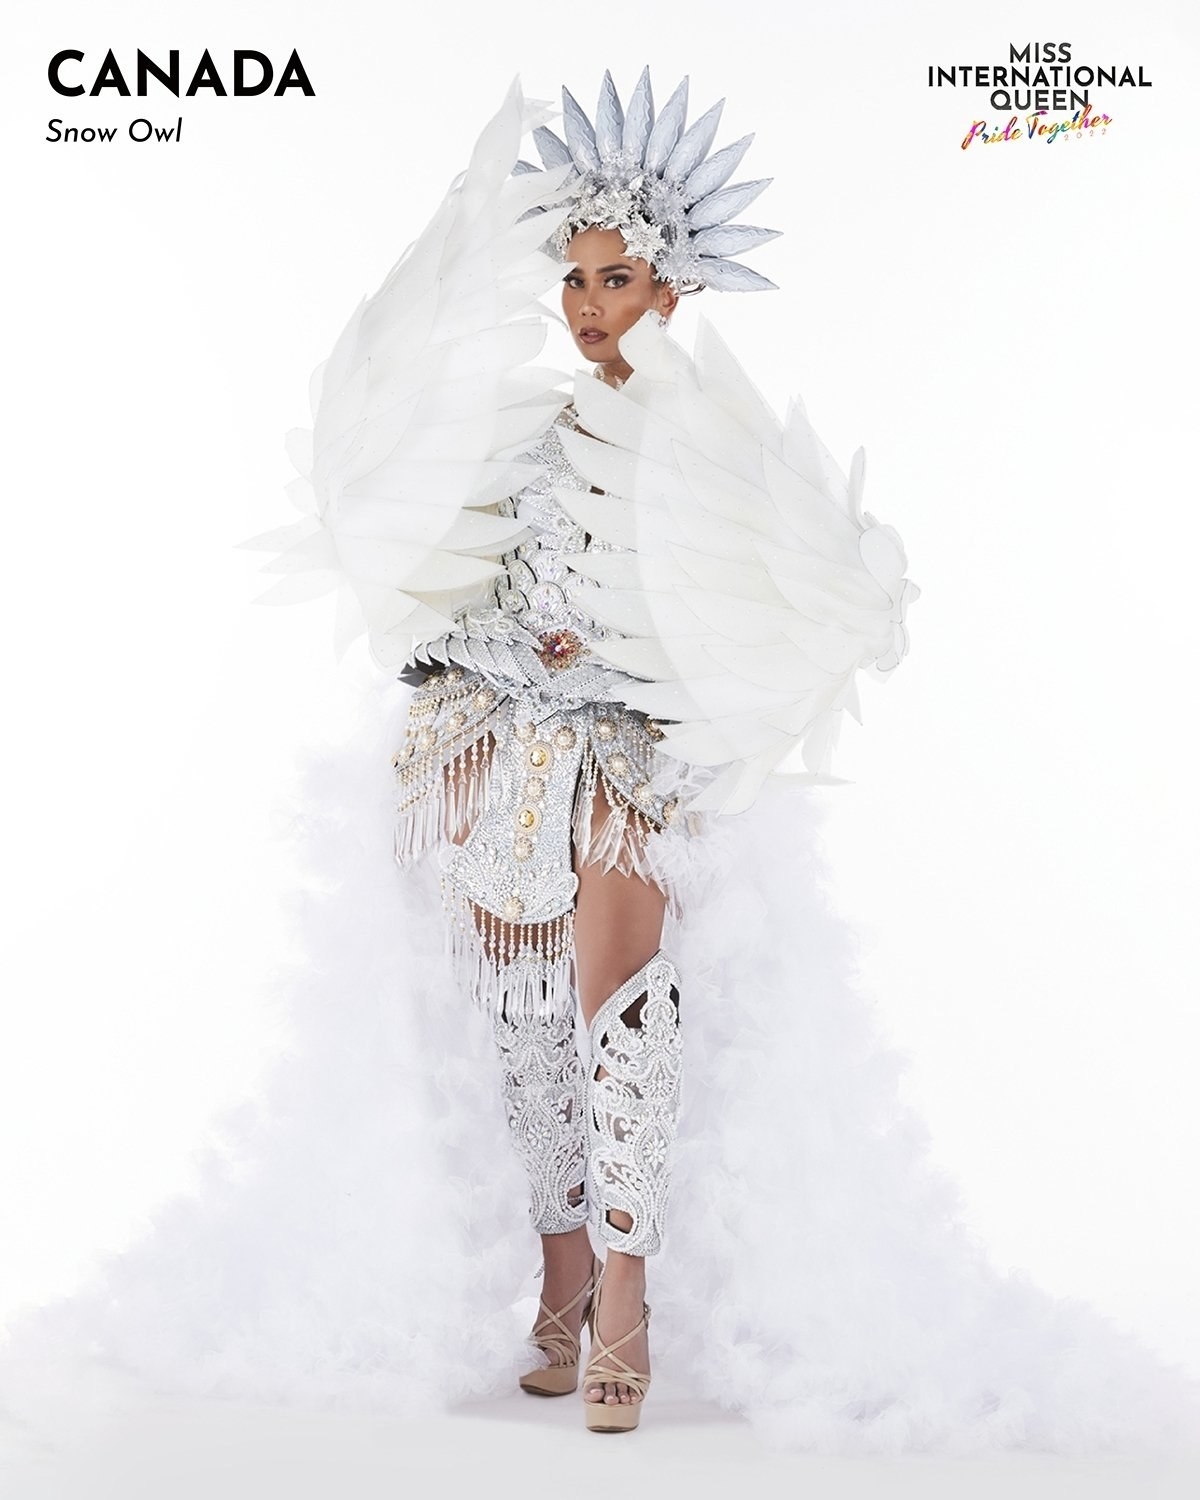 Miss Canada wears white in a snow owl-themed outfit